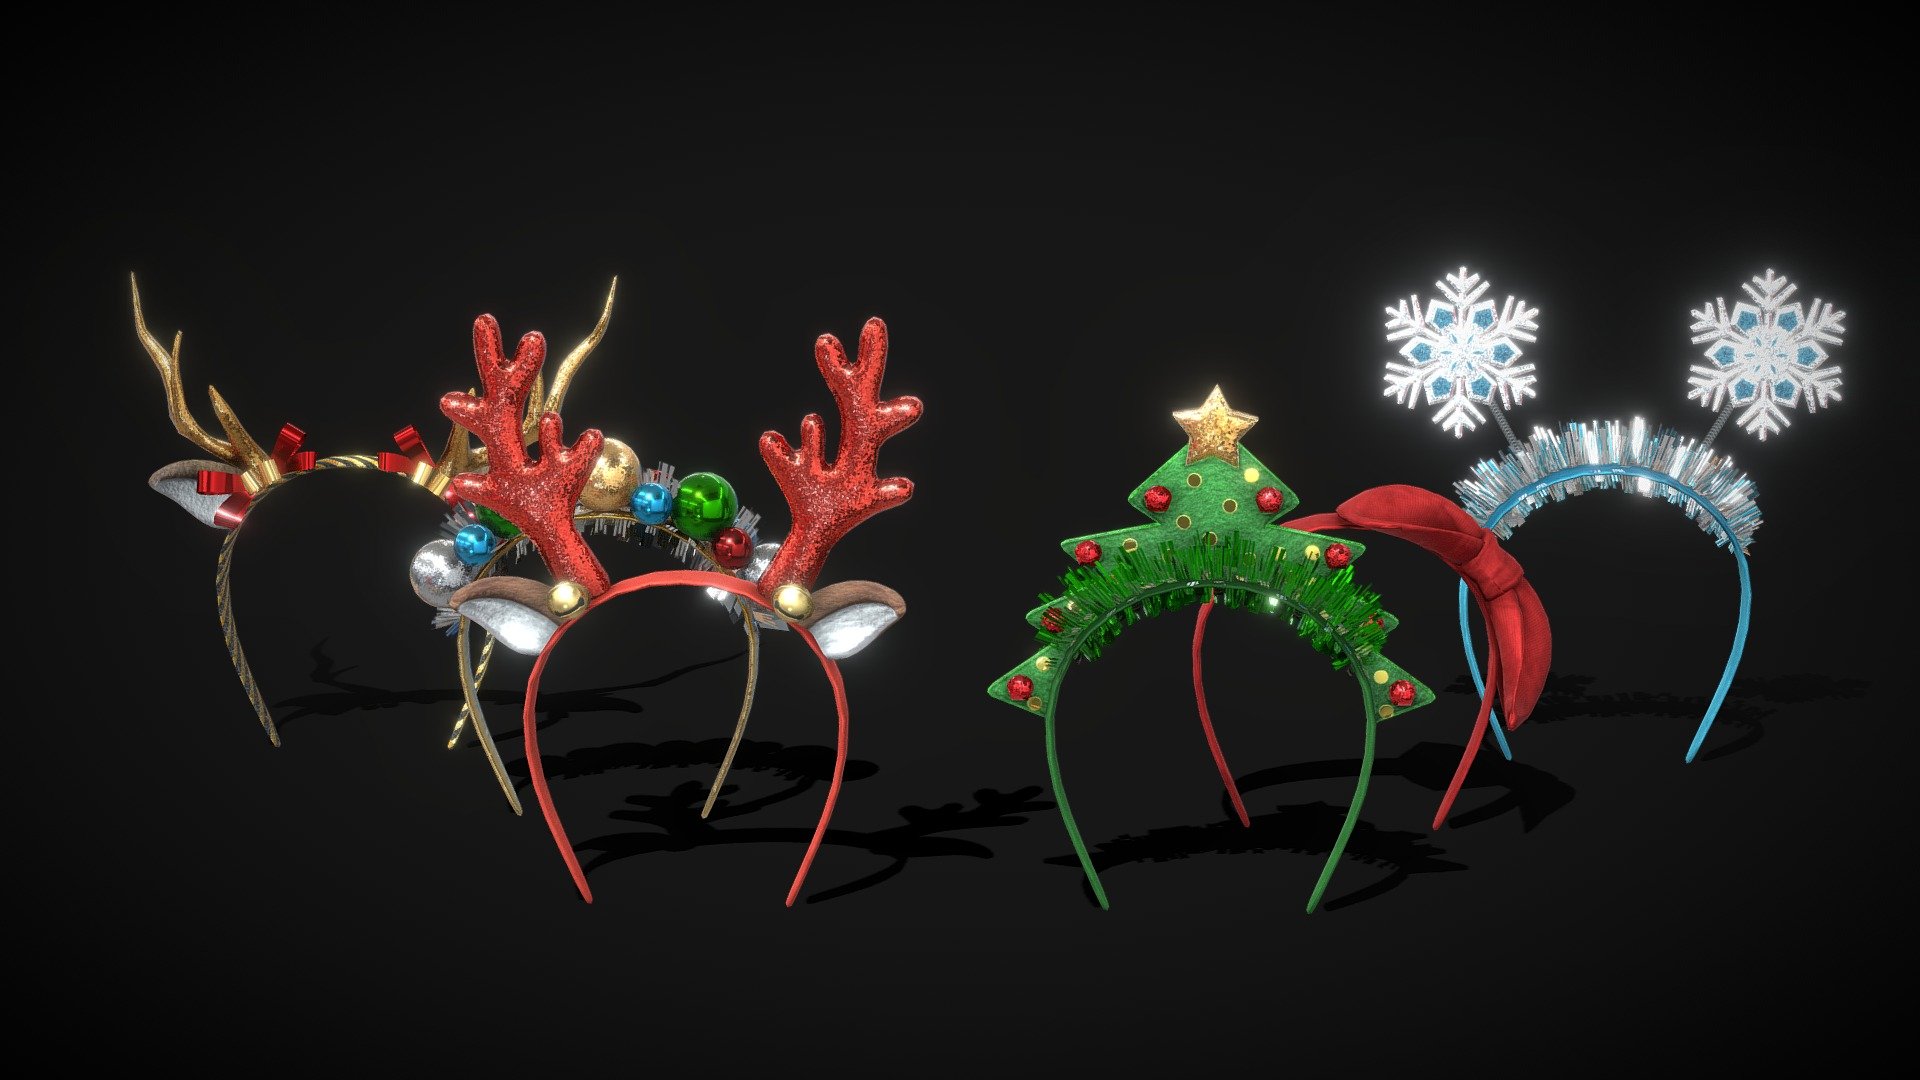 Christmas Headbands - low poly pack

Triangles: 24.3k
Vertices: 14.5k

Pack includes:




Christmas Deer Ear Headband 

Headband With Bow

Christmas Tree Headband 

Christmas Snowflake Headband

Christmas Deer Ear Headband v2

Christmas Headband

4K Textures and separate models in additional file.

Commercial use*

My models cannot be included in an asset pack or sold at any sort of asset/resource marketplace.* - Christmas Headbands - low poly pack - Buy Royalty Free 3D model by Karolina Renkiewicz (@KarolinaRenkiewicz) 3d model